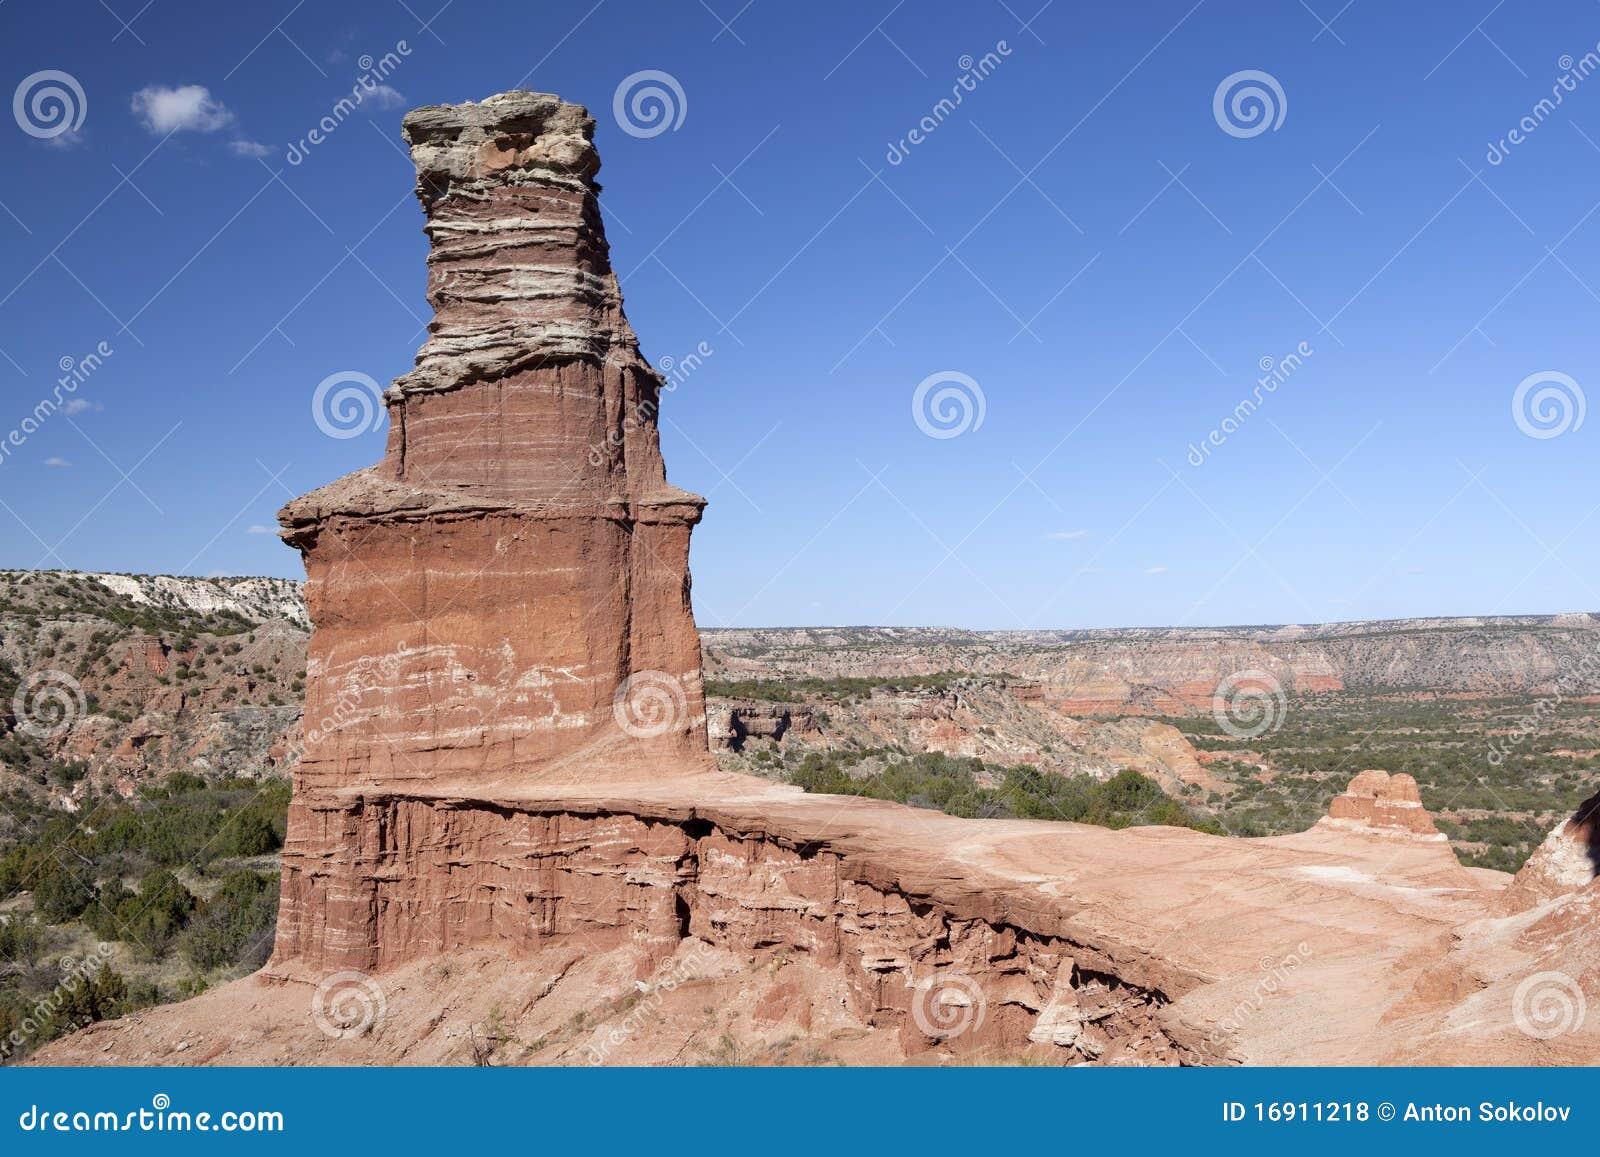 the light house formation in palo duro canyon.